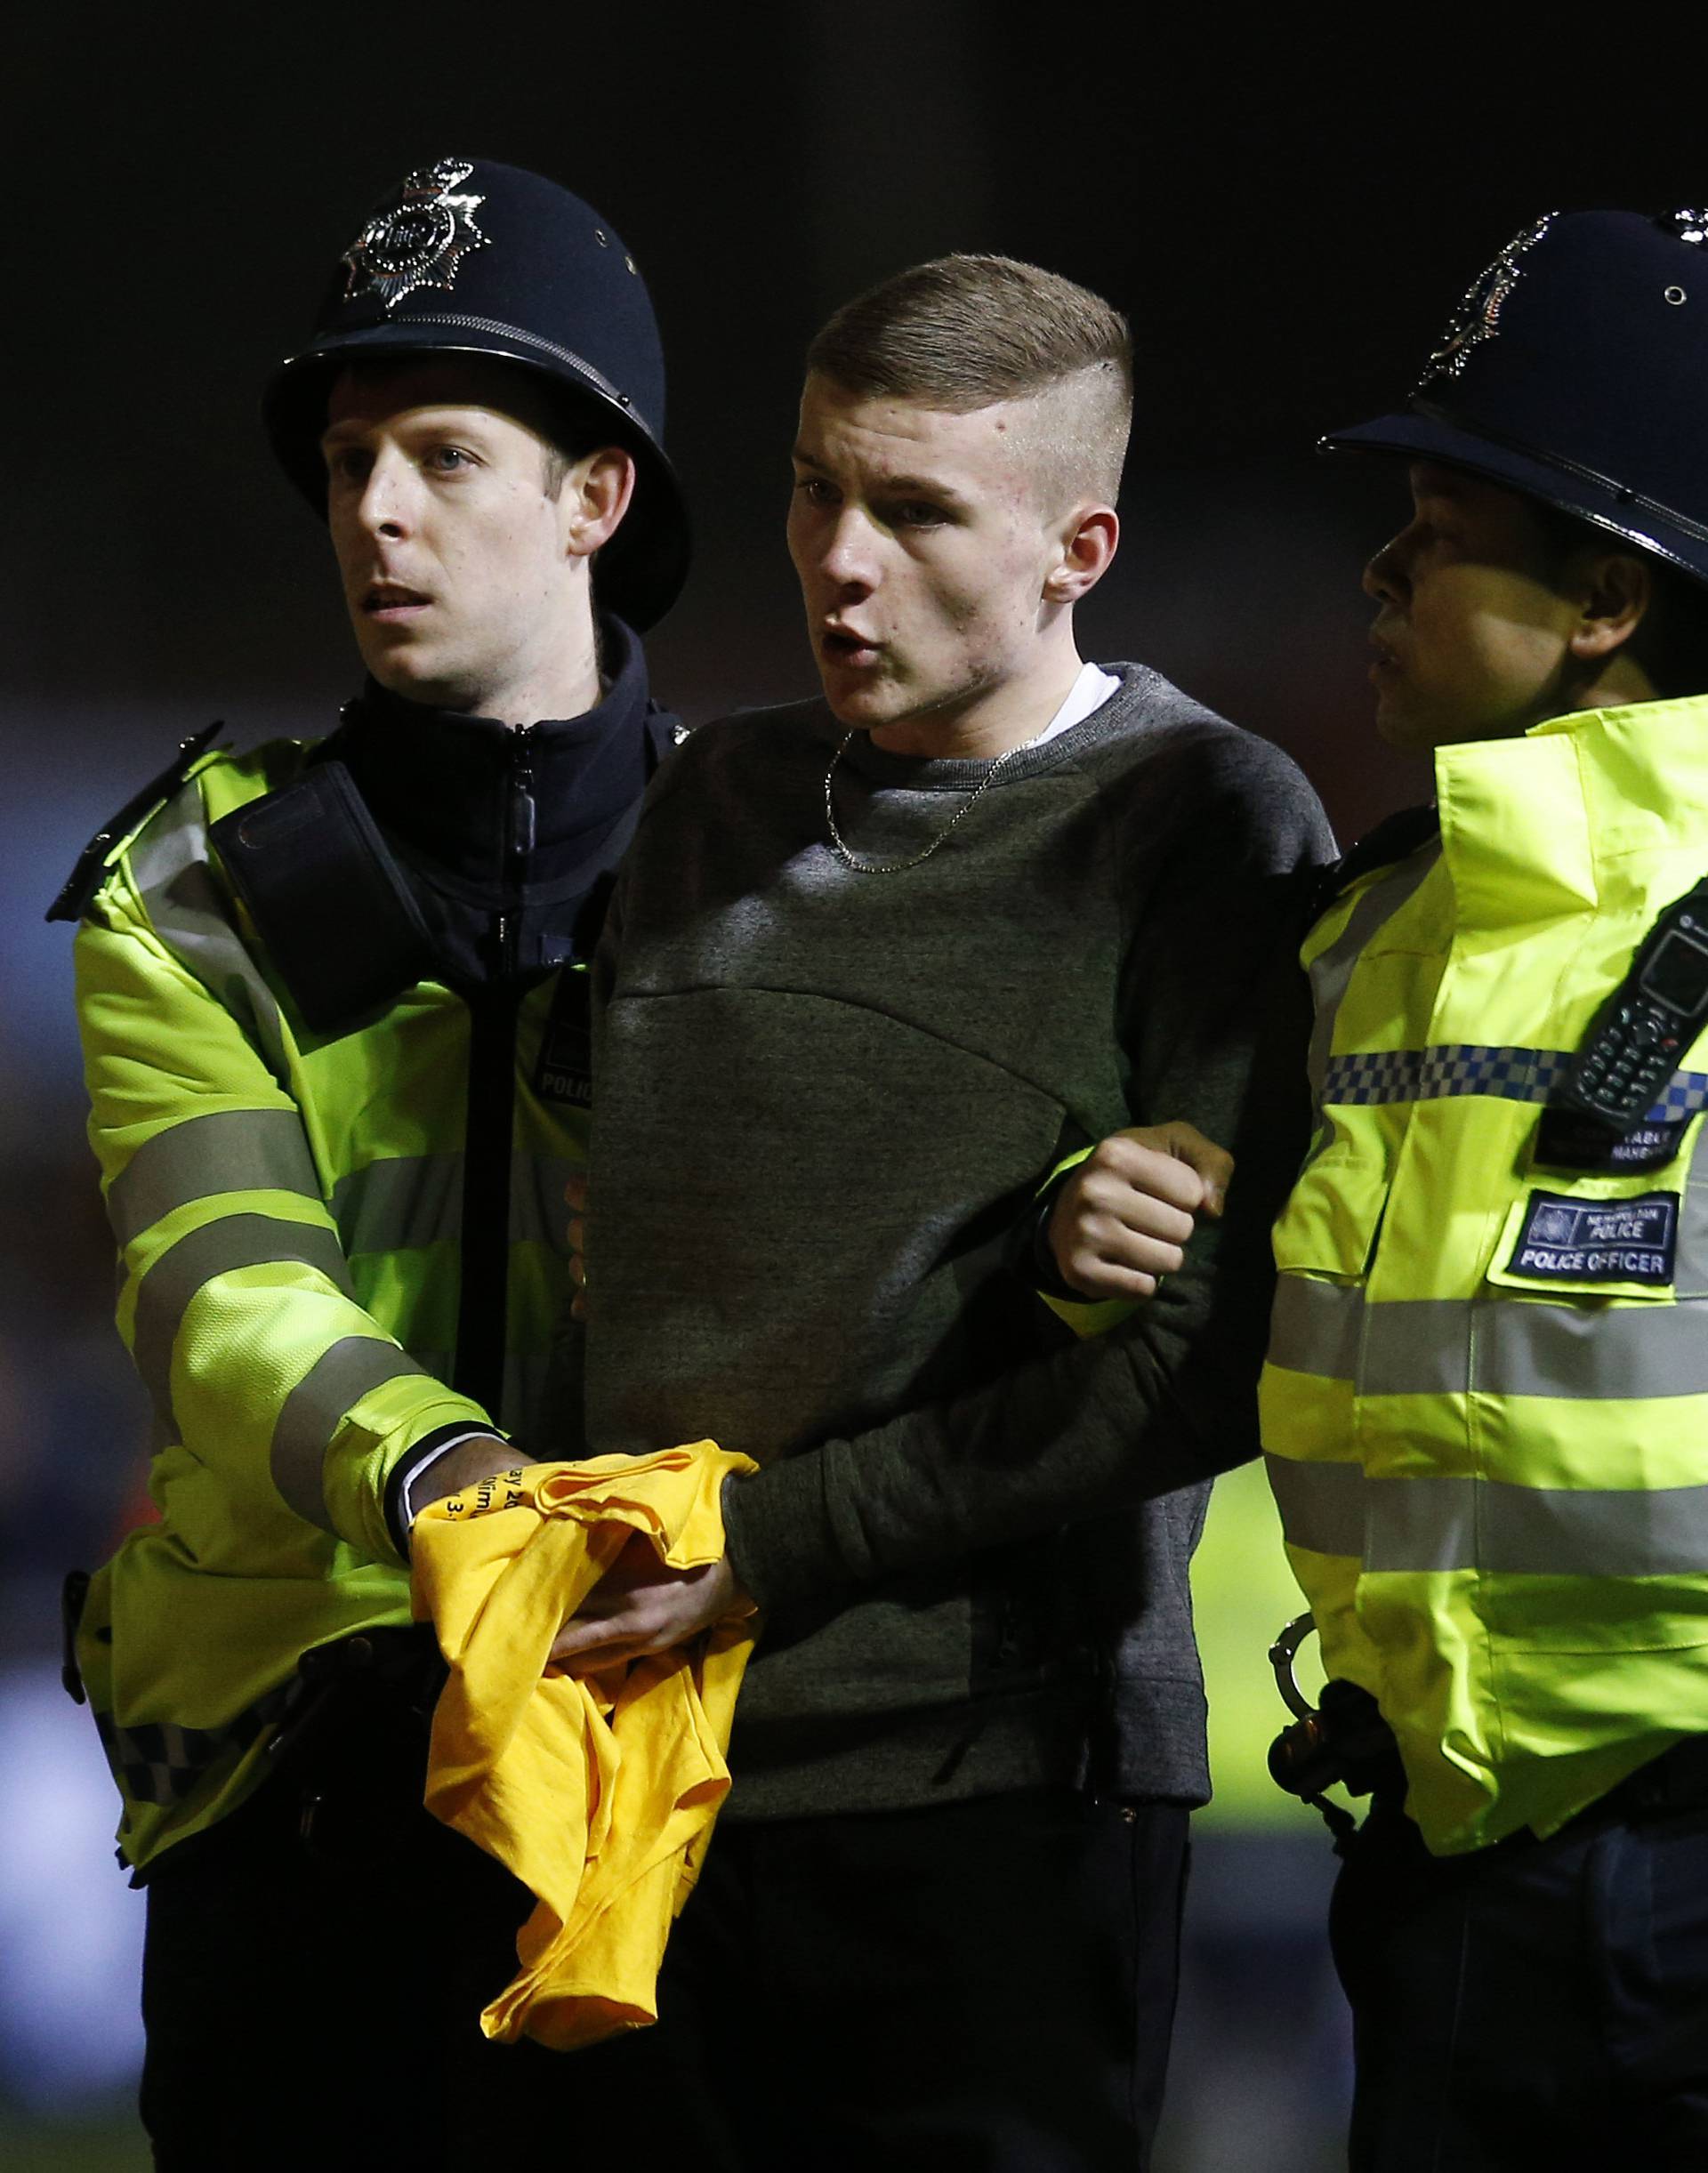 A Sutton fan on the pitch escorted by police officers after the match